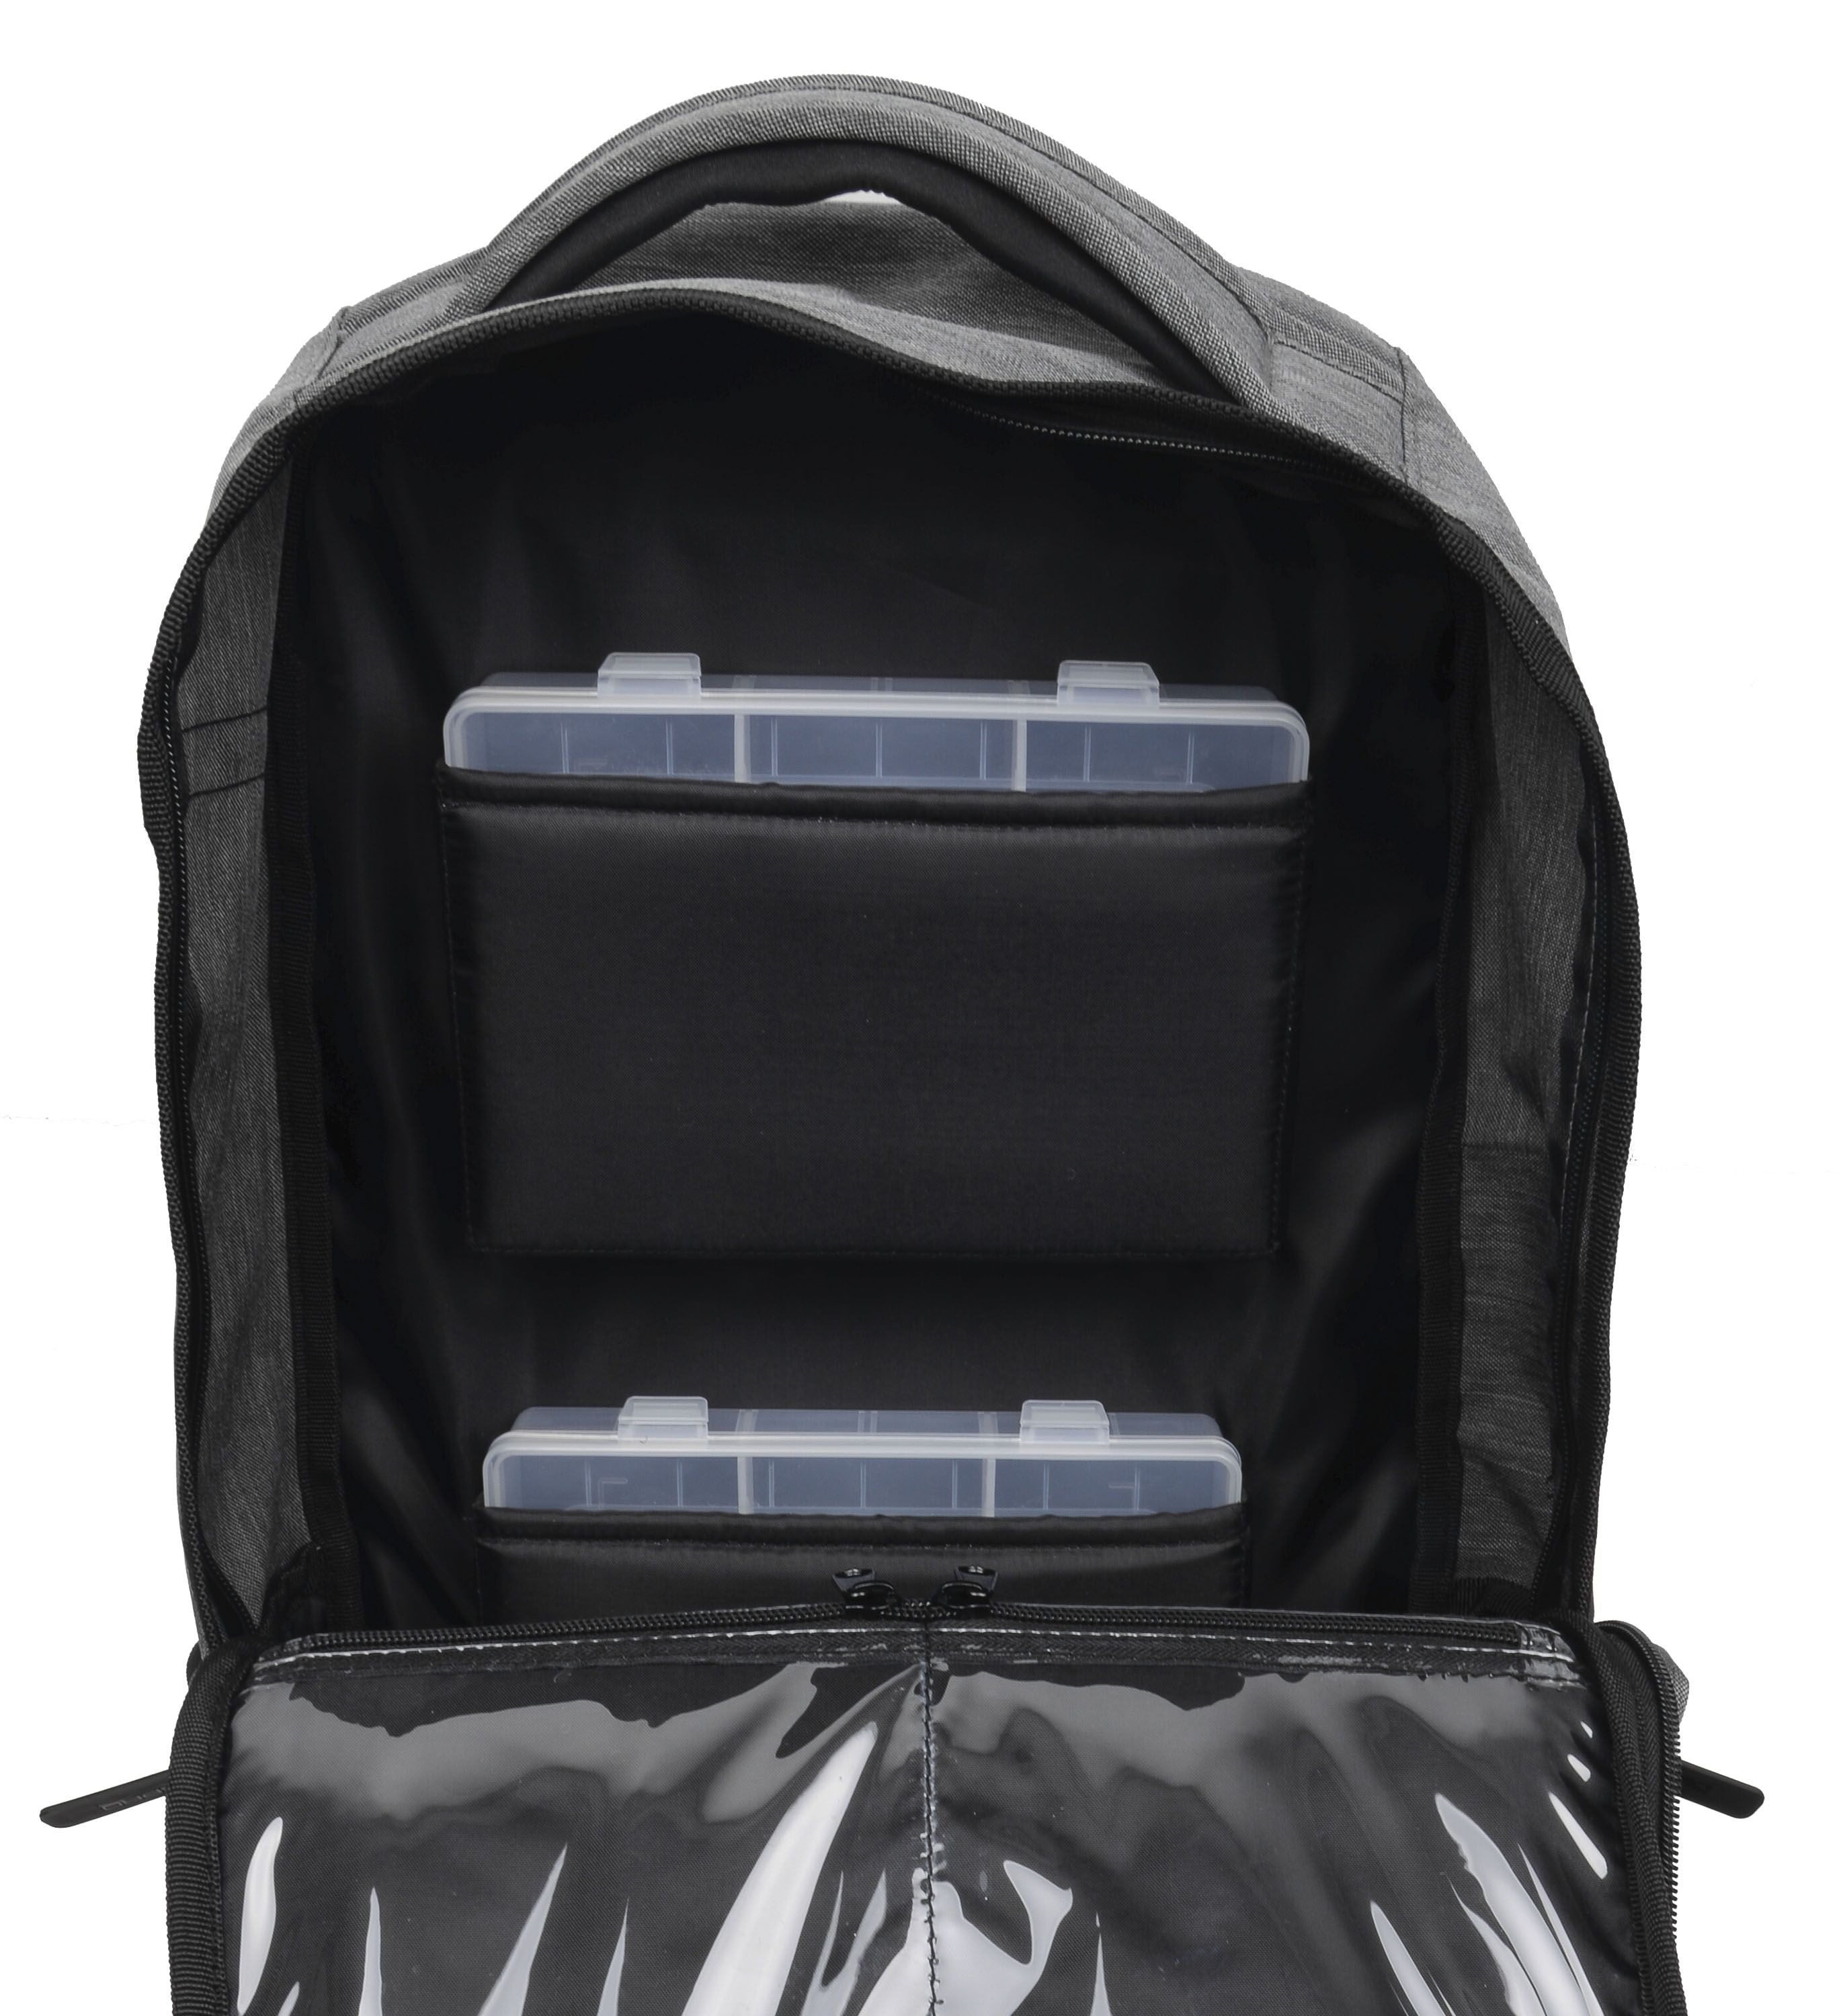 Spro FreeStyle Backpack 22 Inclusief 2 Tackleboxen